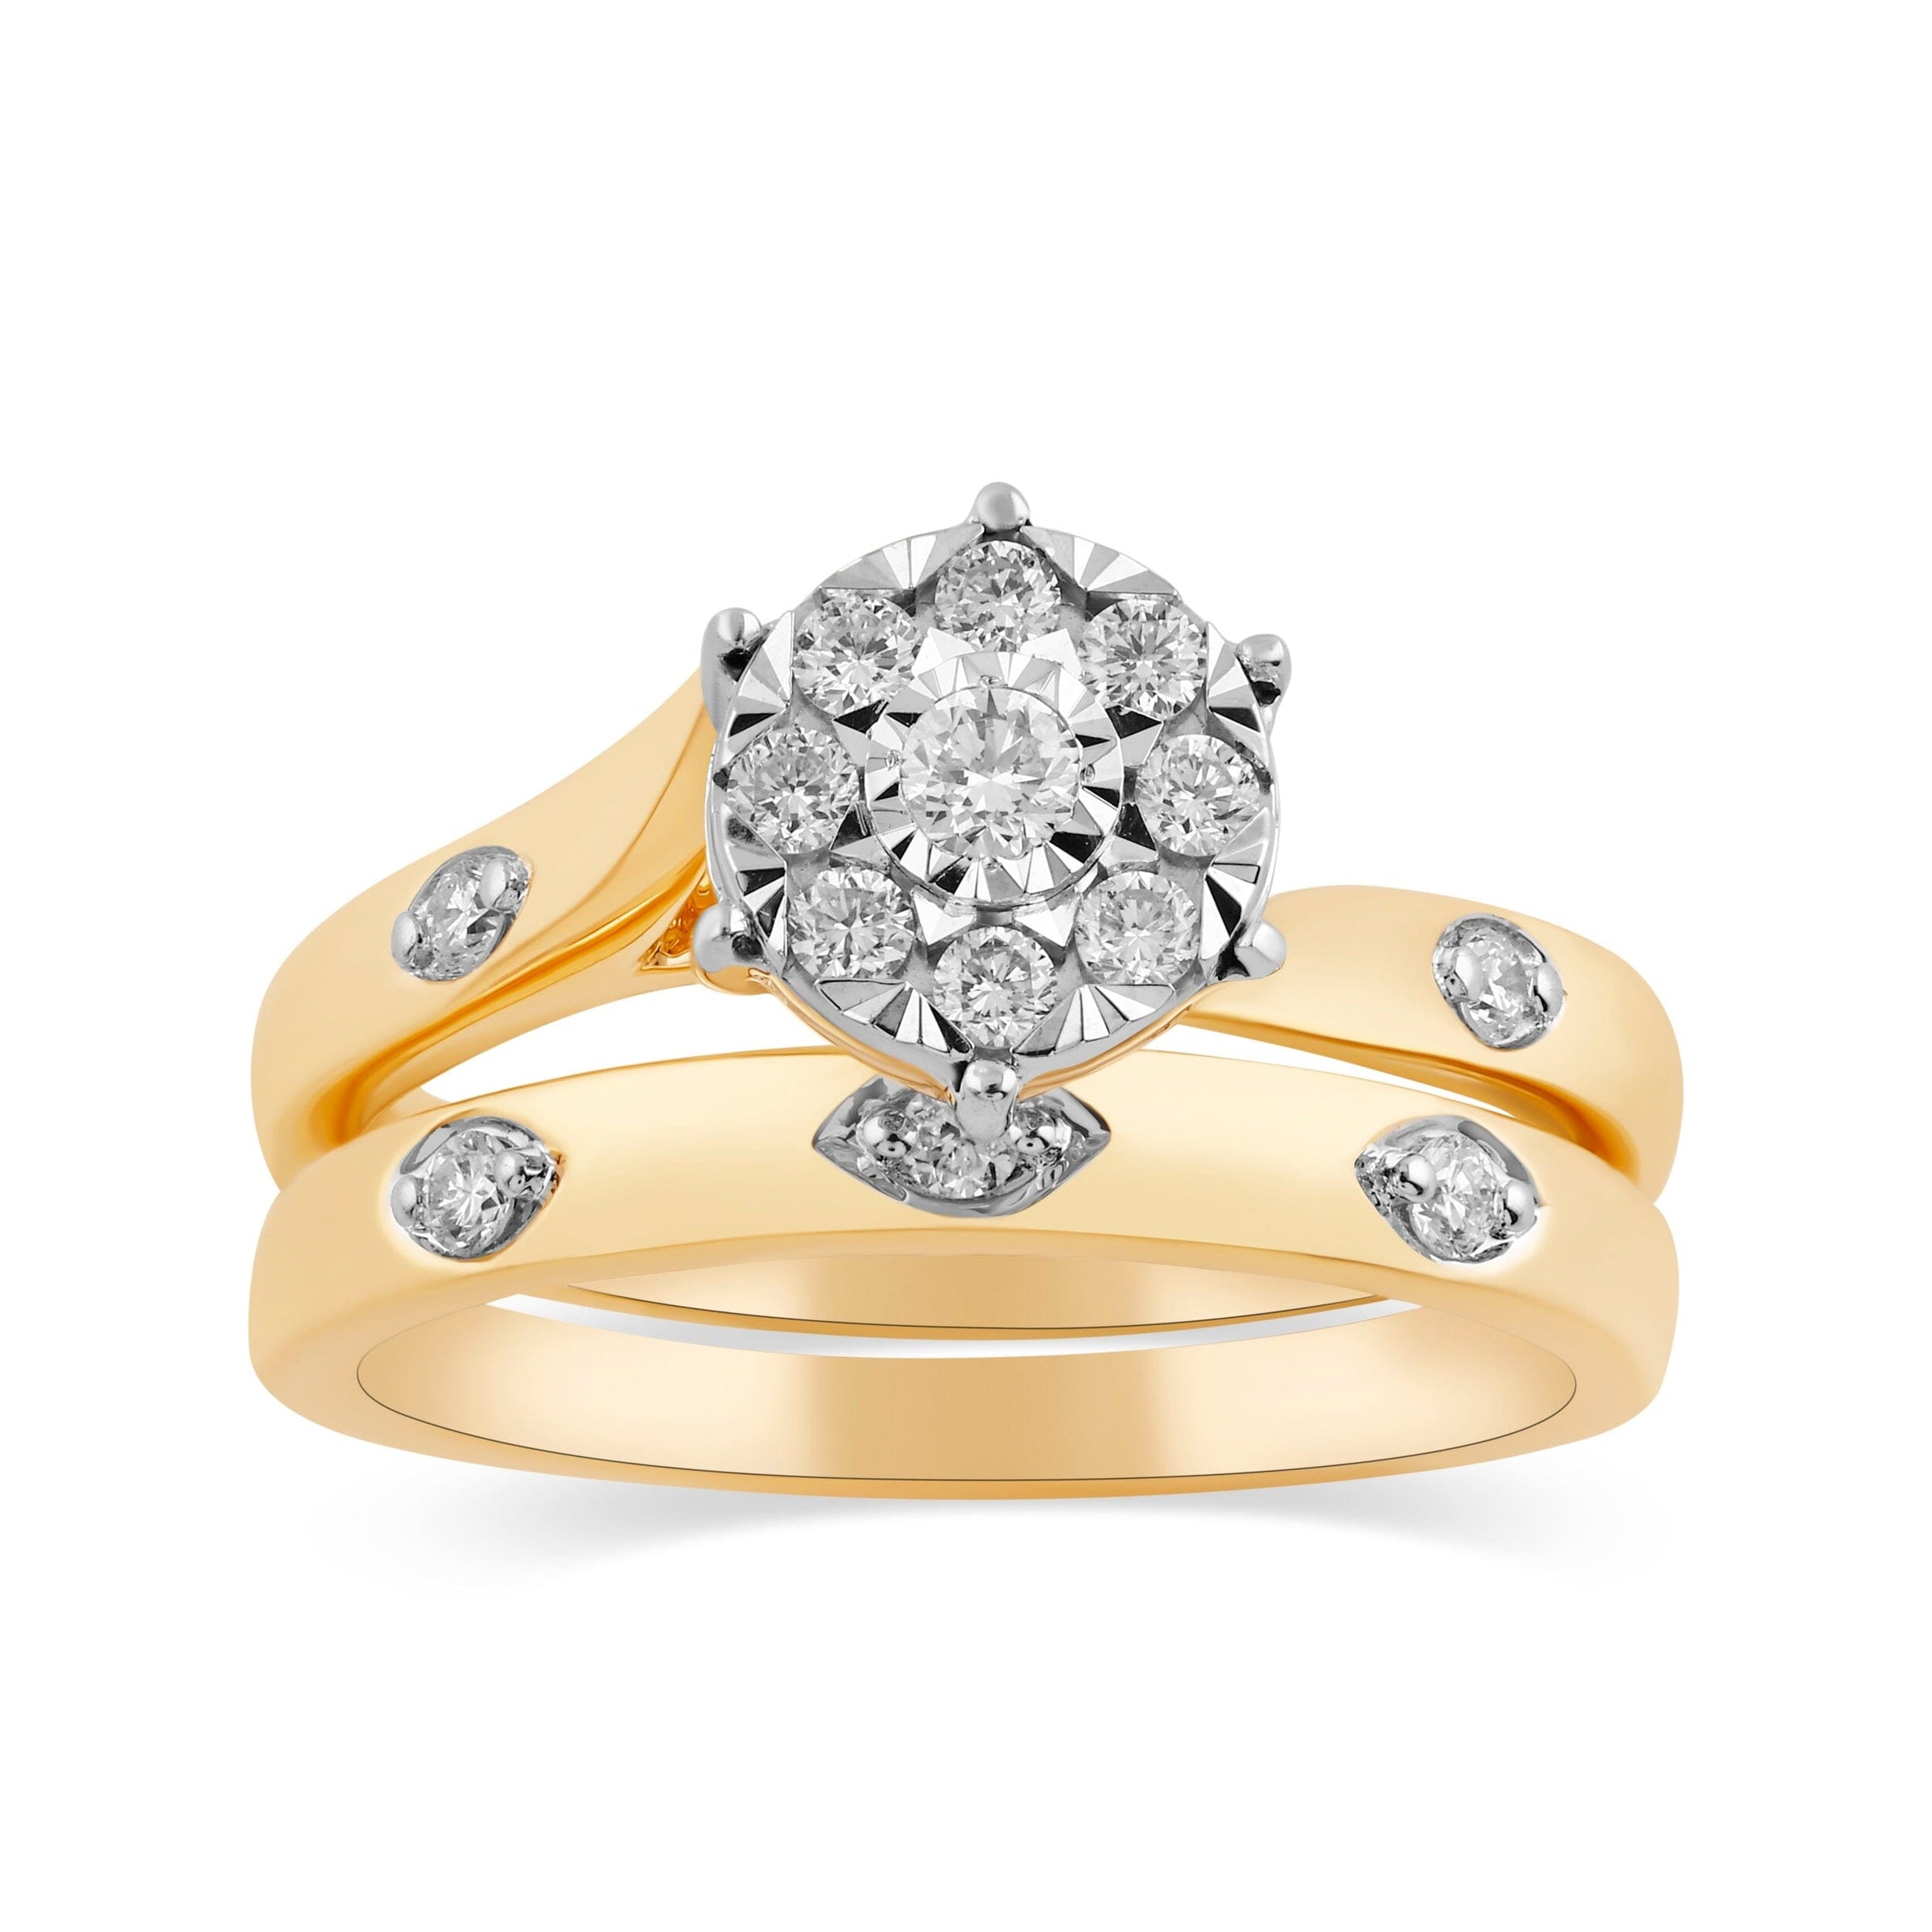 Meera Surround Flower Studded Ring Set with 1/3ct of Laboratory Grown Diamonds in 9ct Yellow Gold Rings Bevilles 